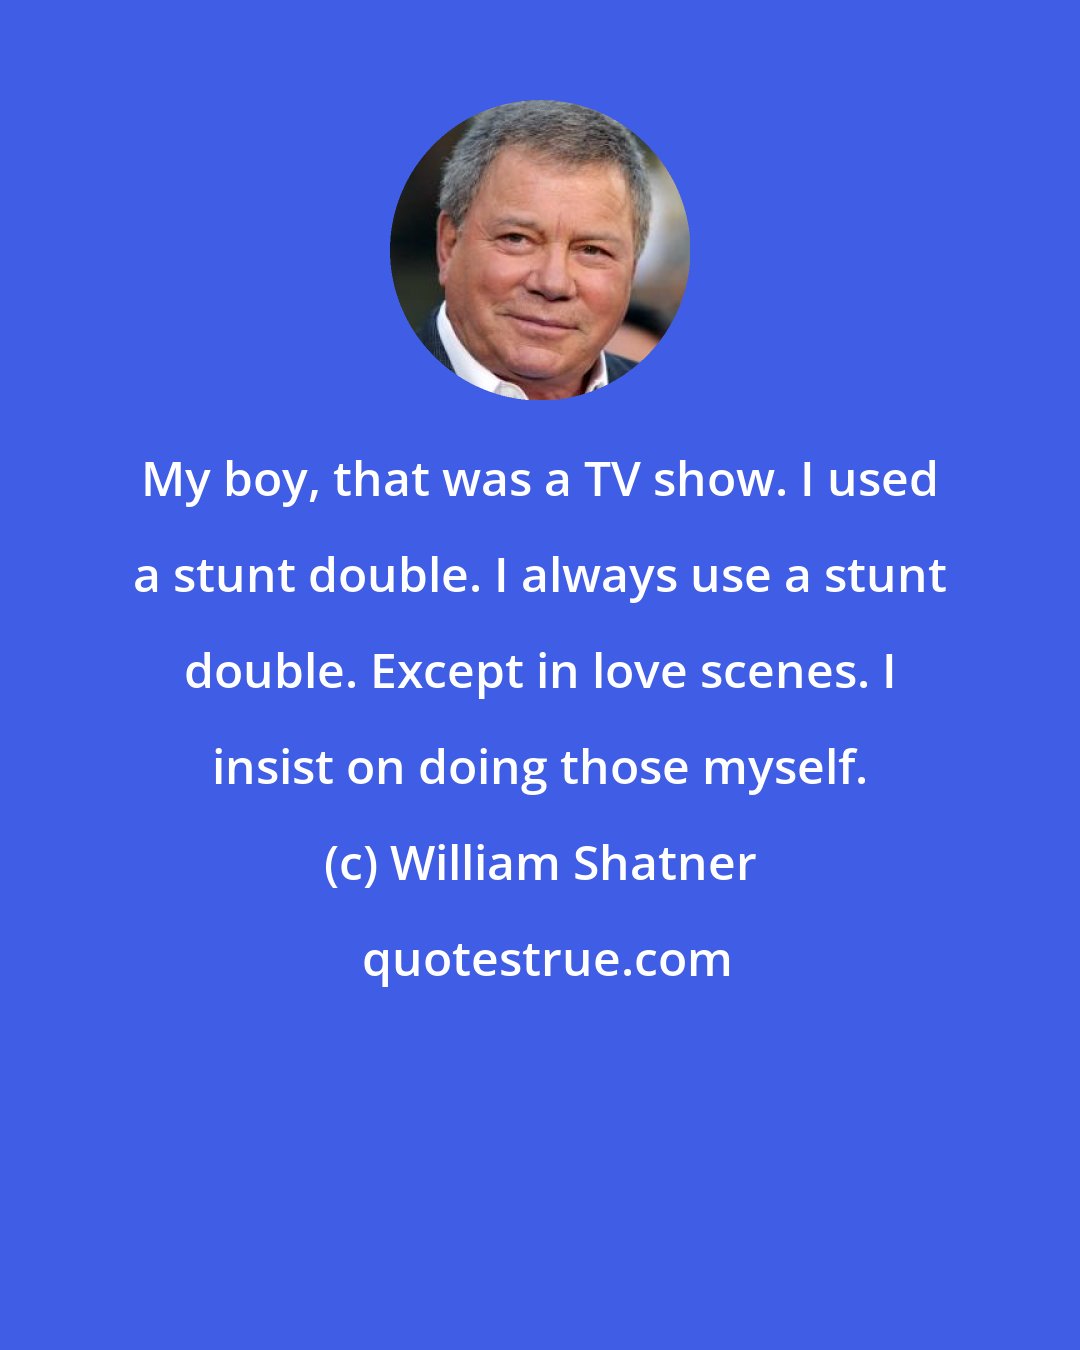 William Shatner: My boy, that was a TV show. I used a stunt double. I always use a stunt double. Except in love scenes. I insist on doing those myself.